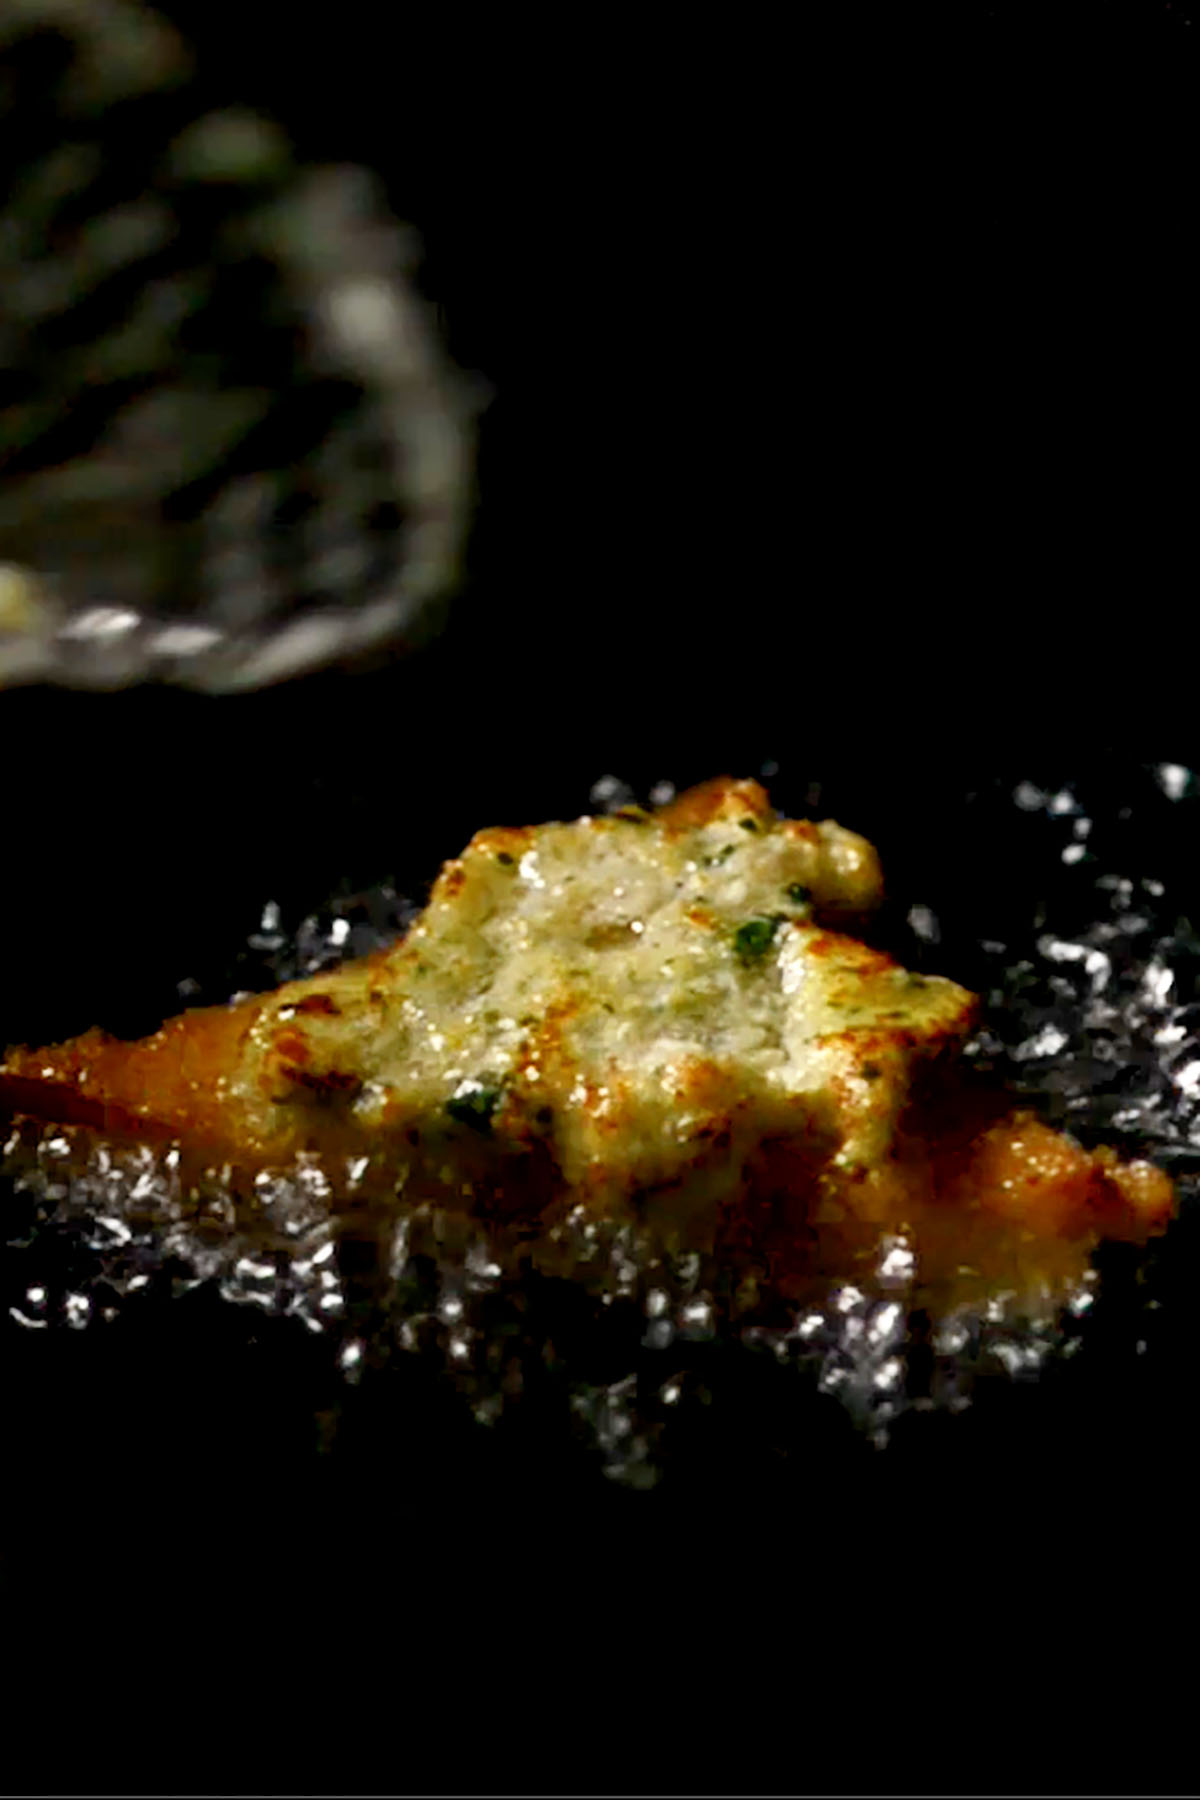 A piece of shrimp toast frying in oil.